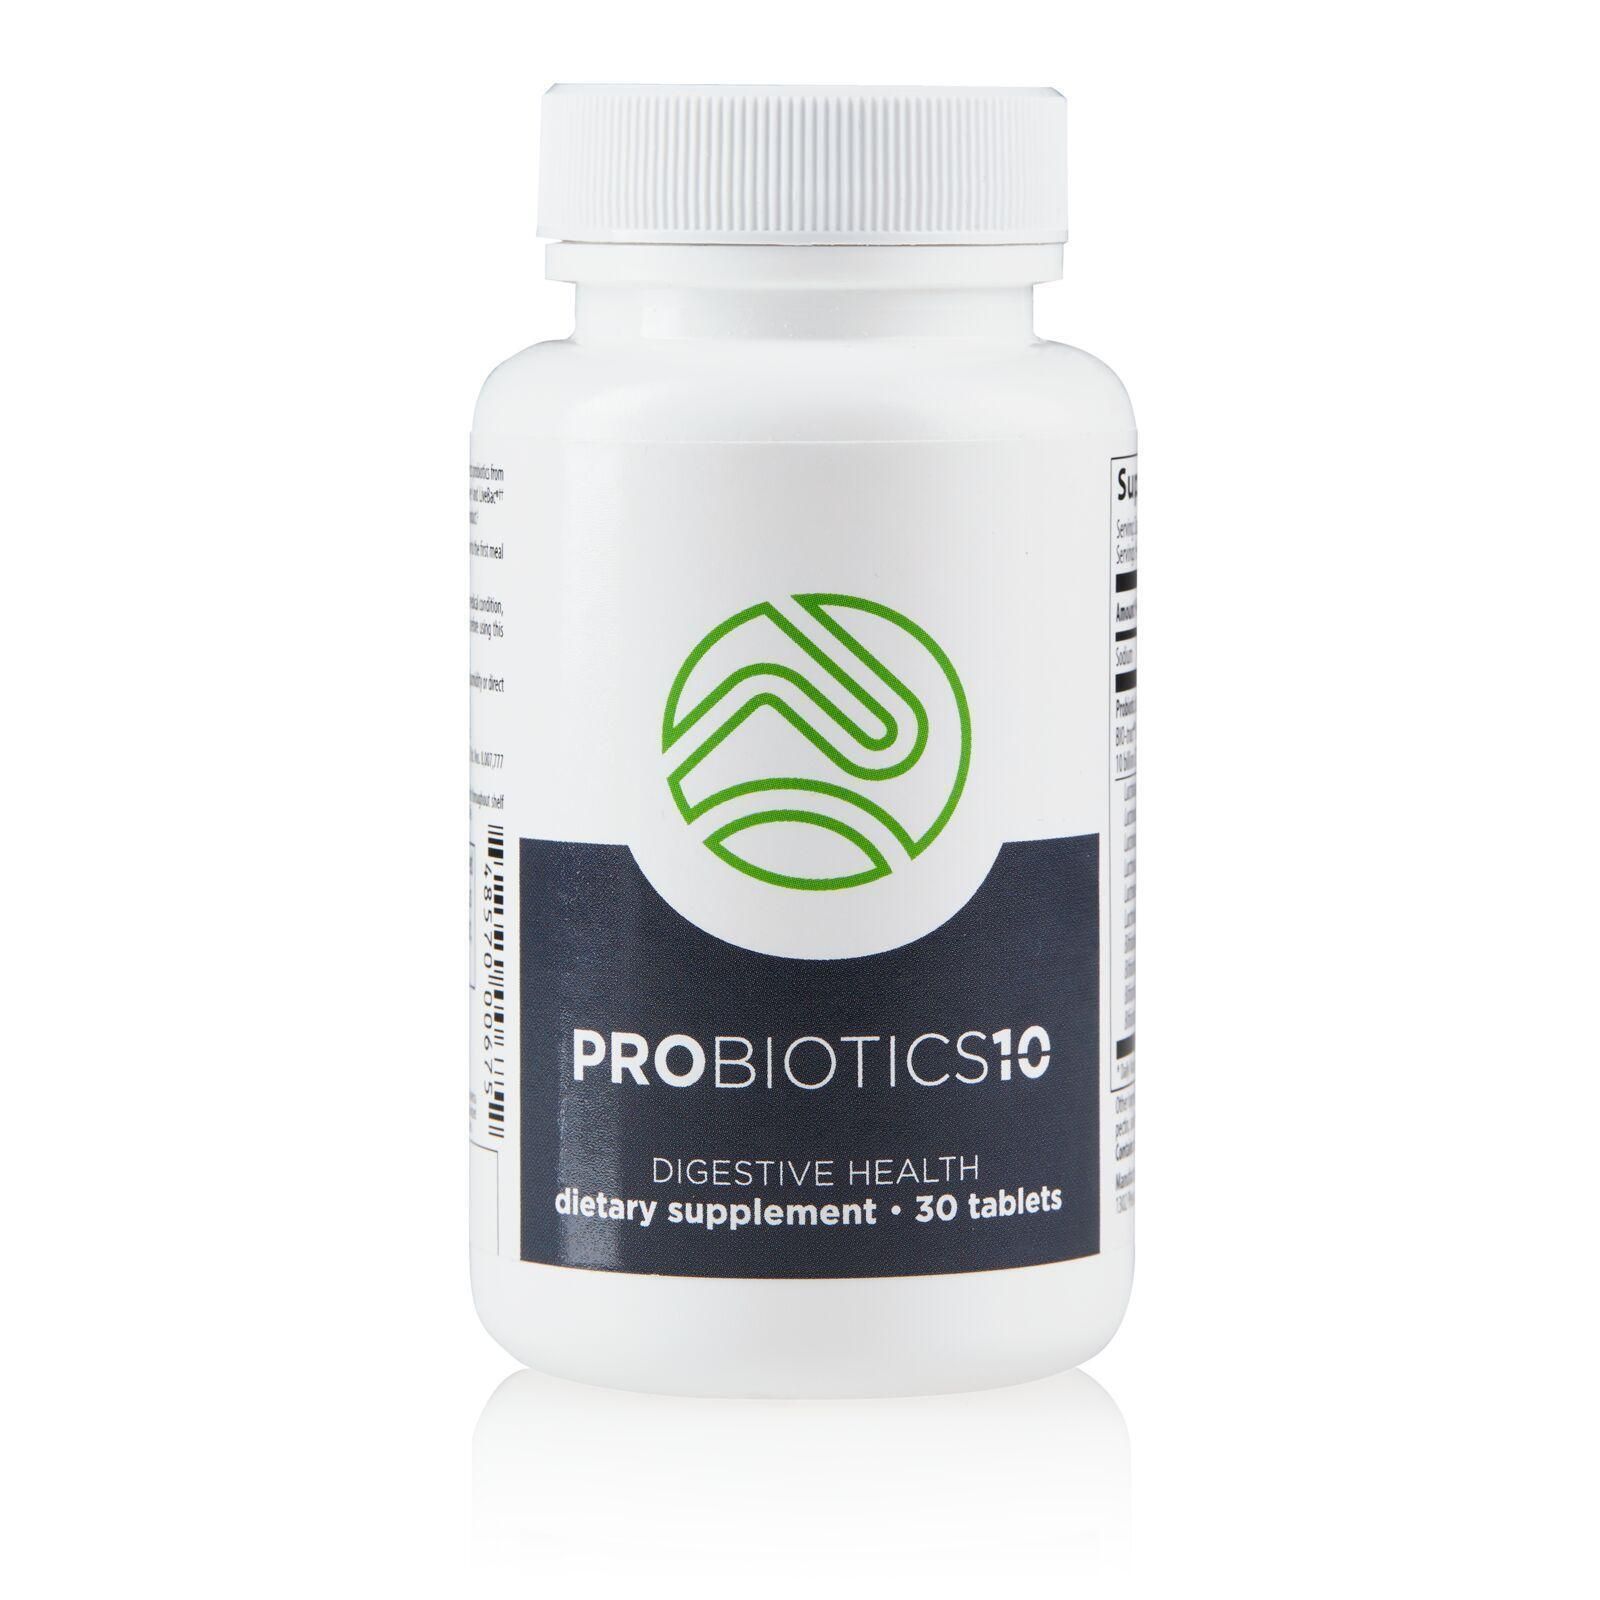 A bottle of probiotics is sitting on a white surface.